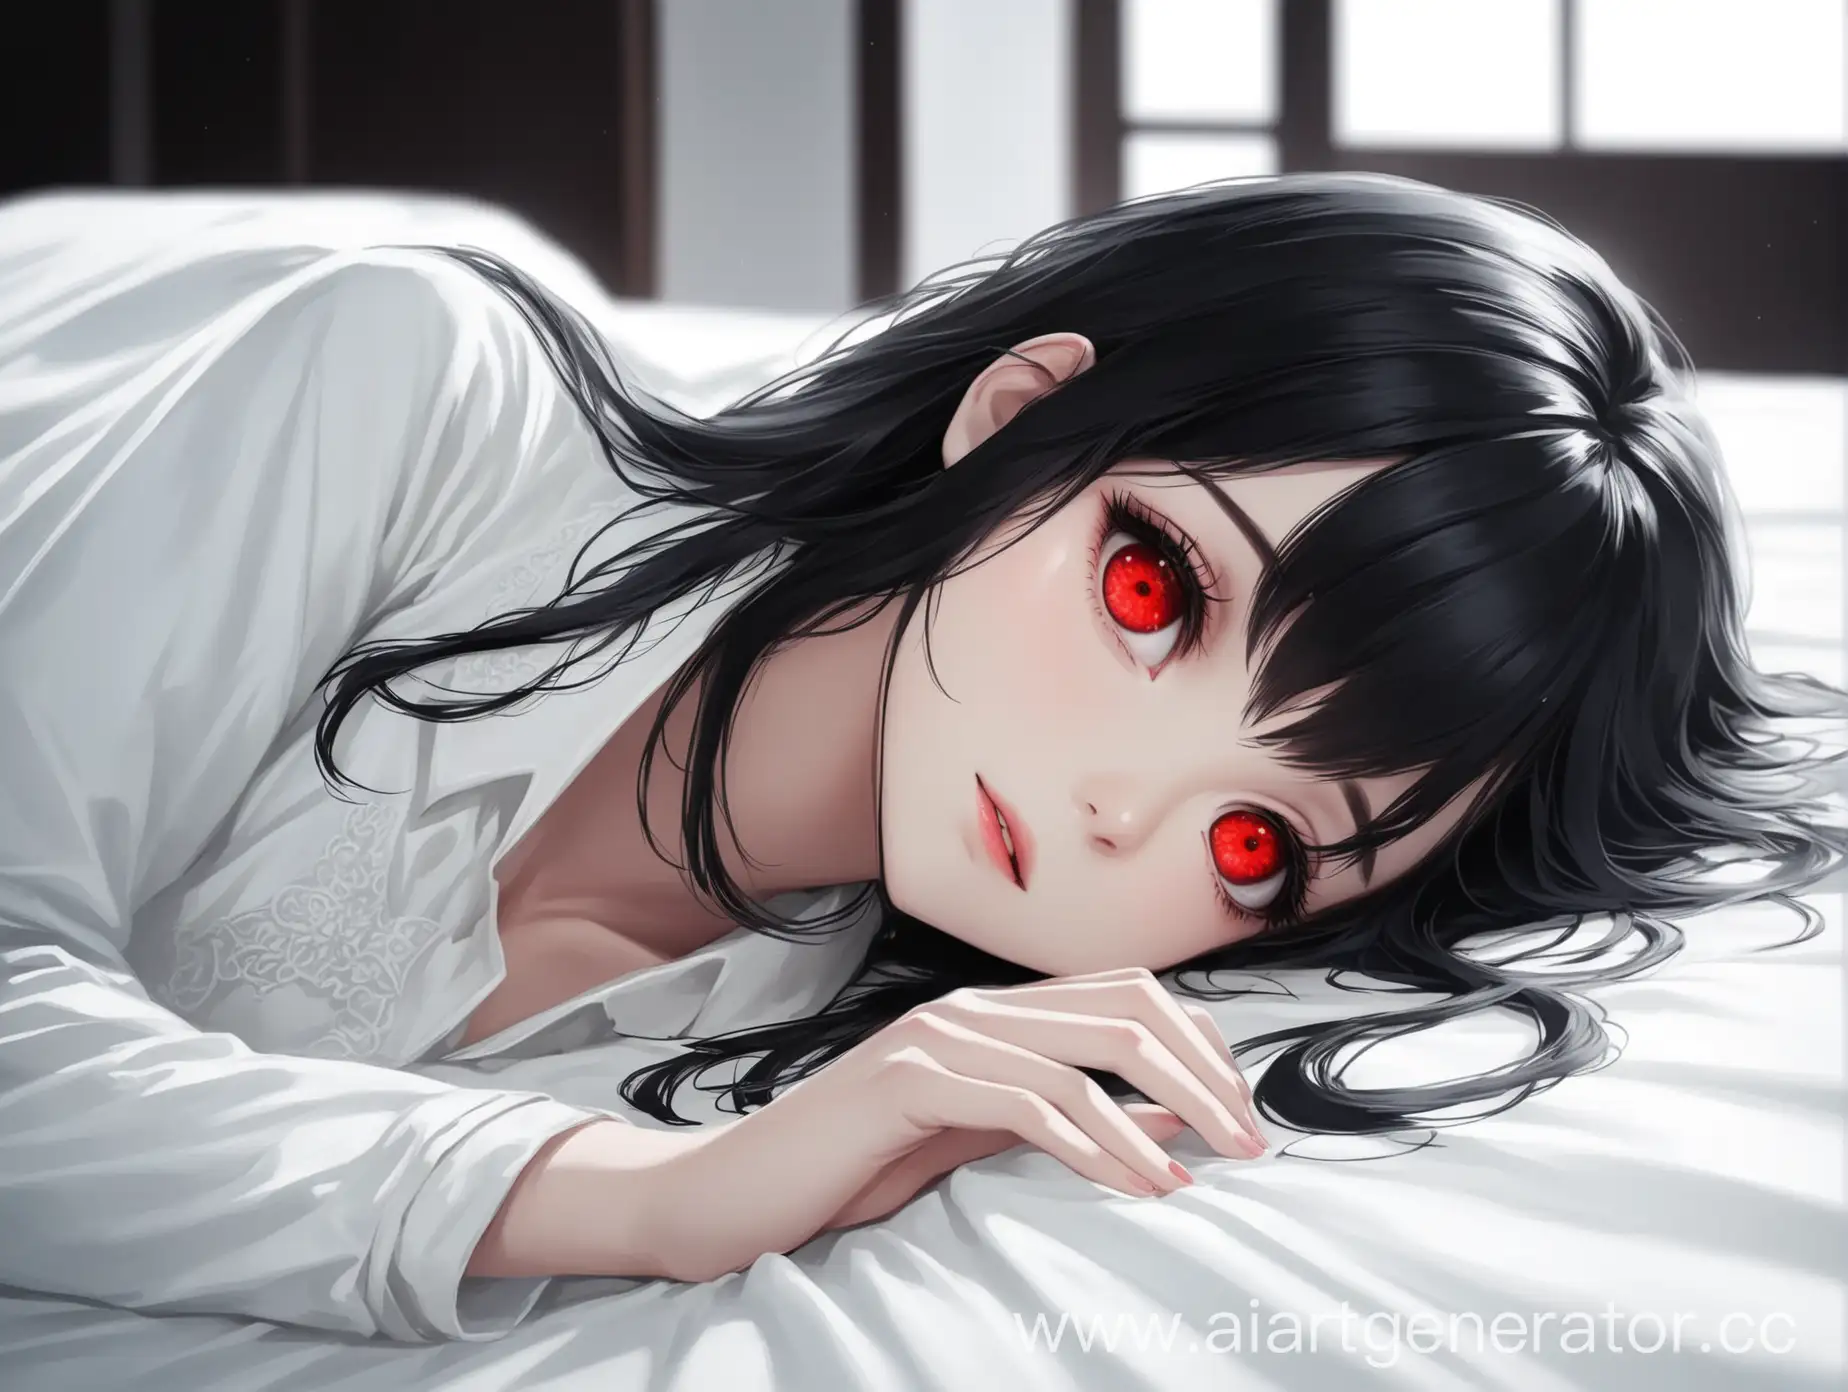 A beautiful girl with black hair and red eyes wearing white clothes was lying on the bed